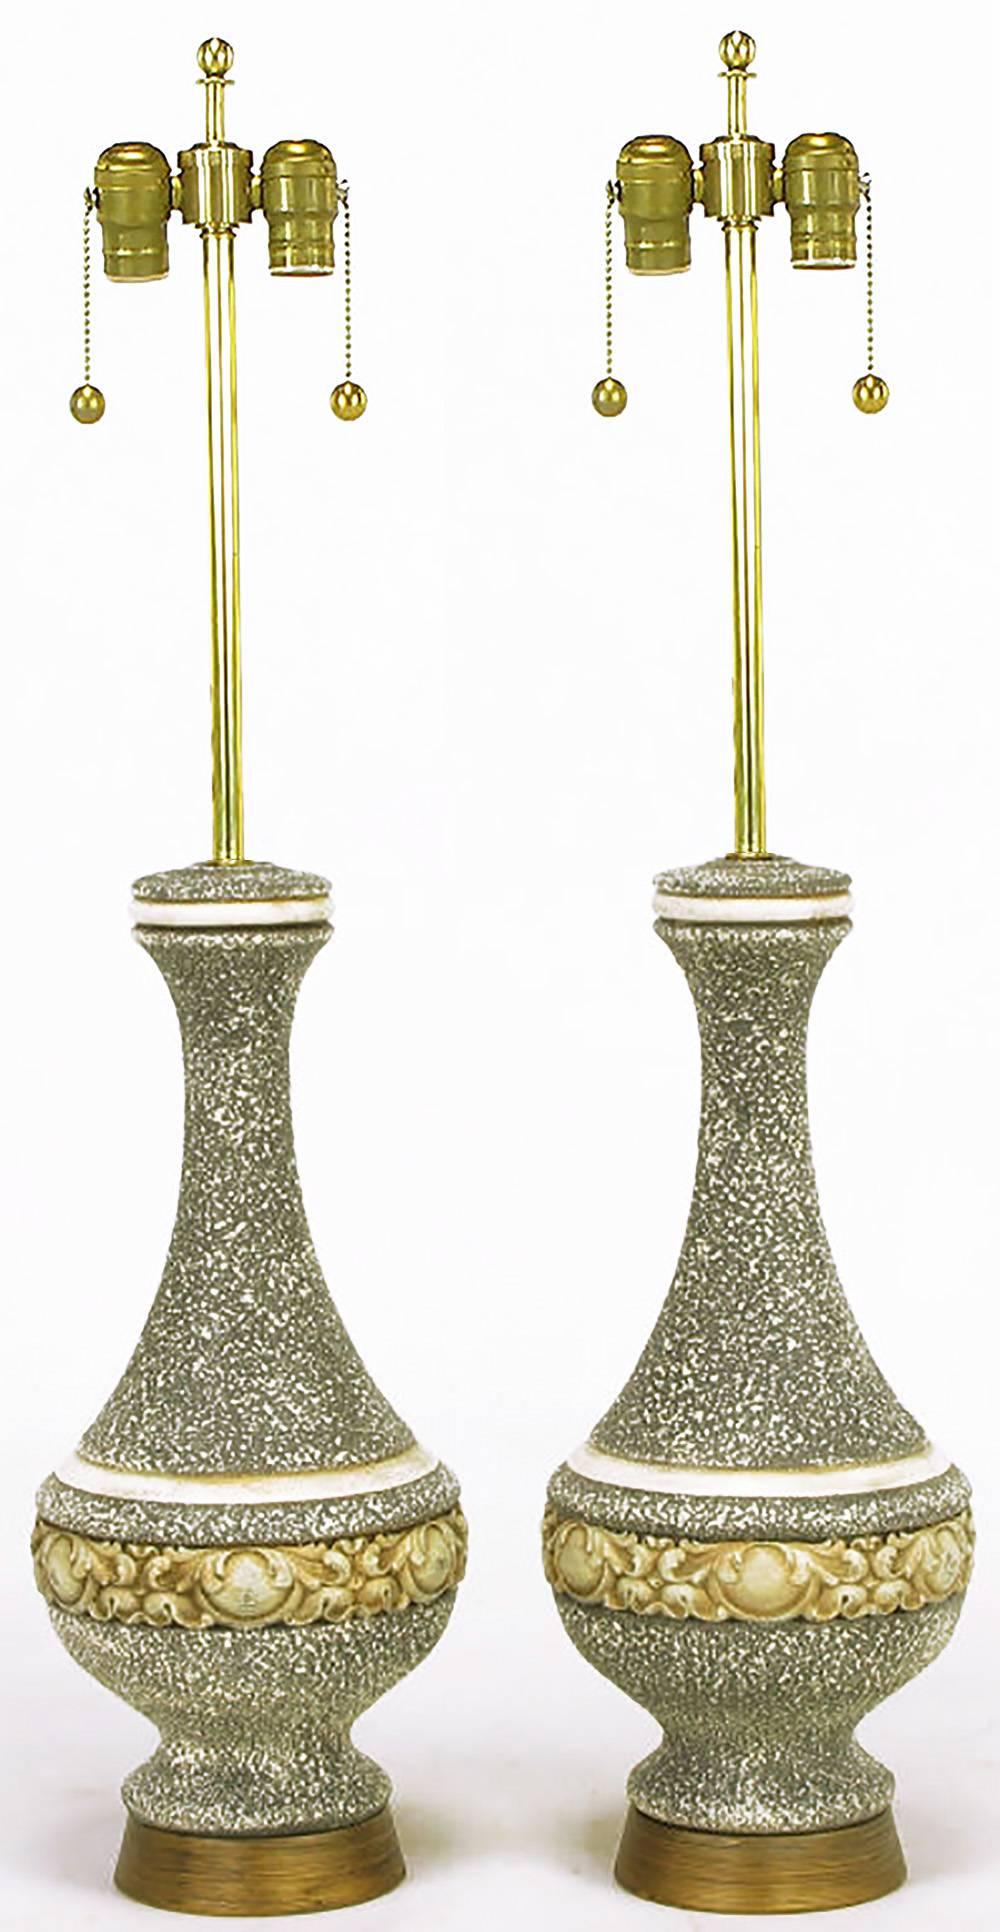 Pair of urn form Rococo style heavy cast plaster table lamps with a tactile variegated gray glaze and aged gilt finish. Antiqued brass bases with brass stems, harps and sockets.